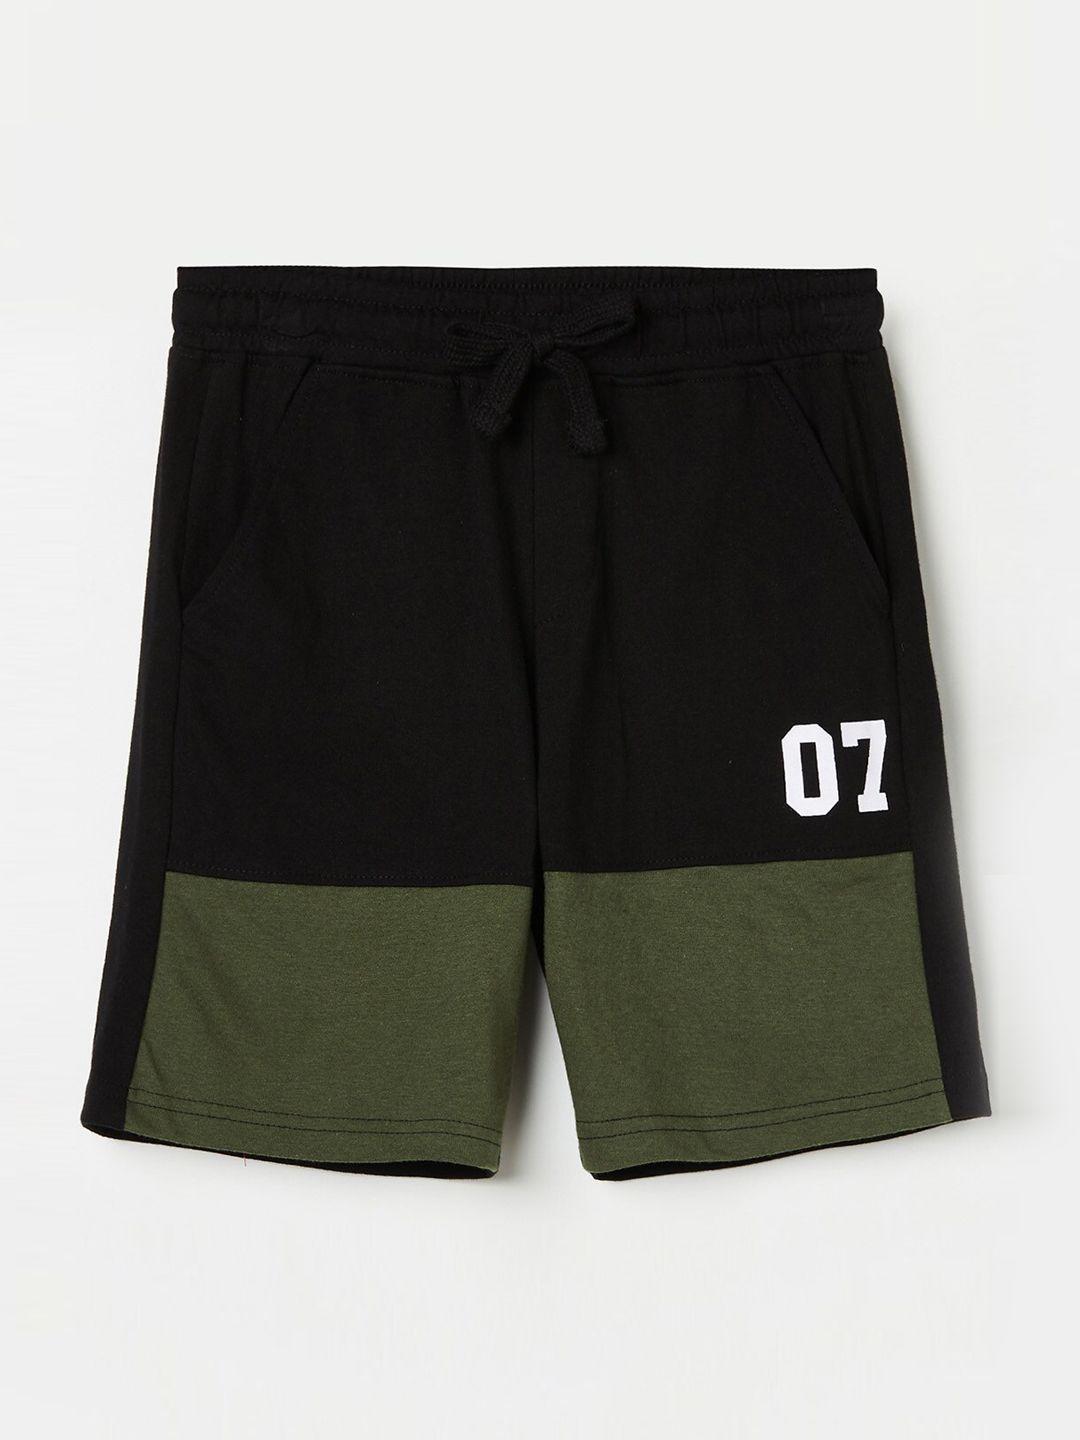 fame-forever-by-lifestyle-boys-black-&-olive-solid-cotton-shorts